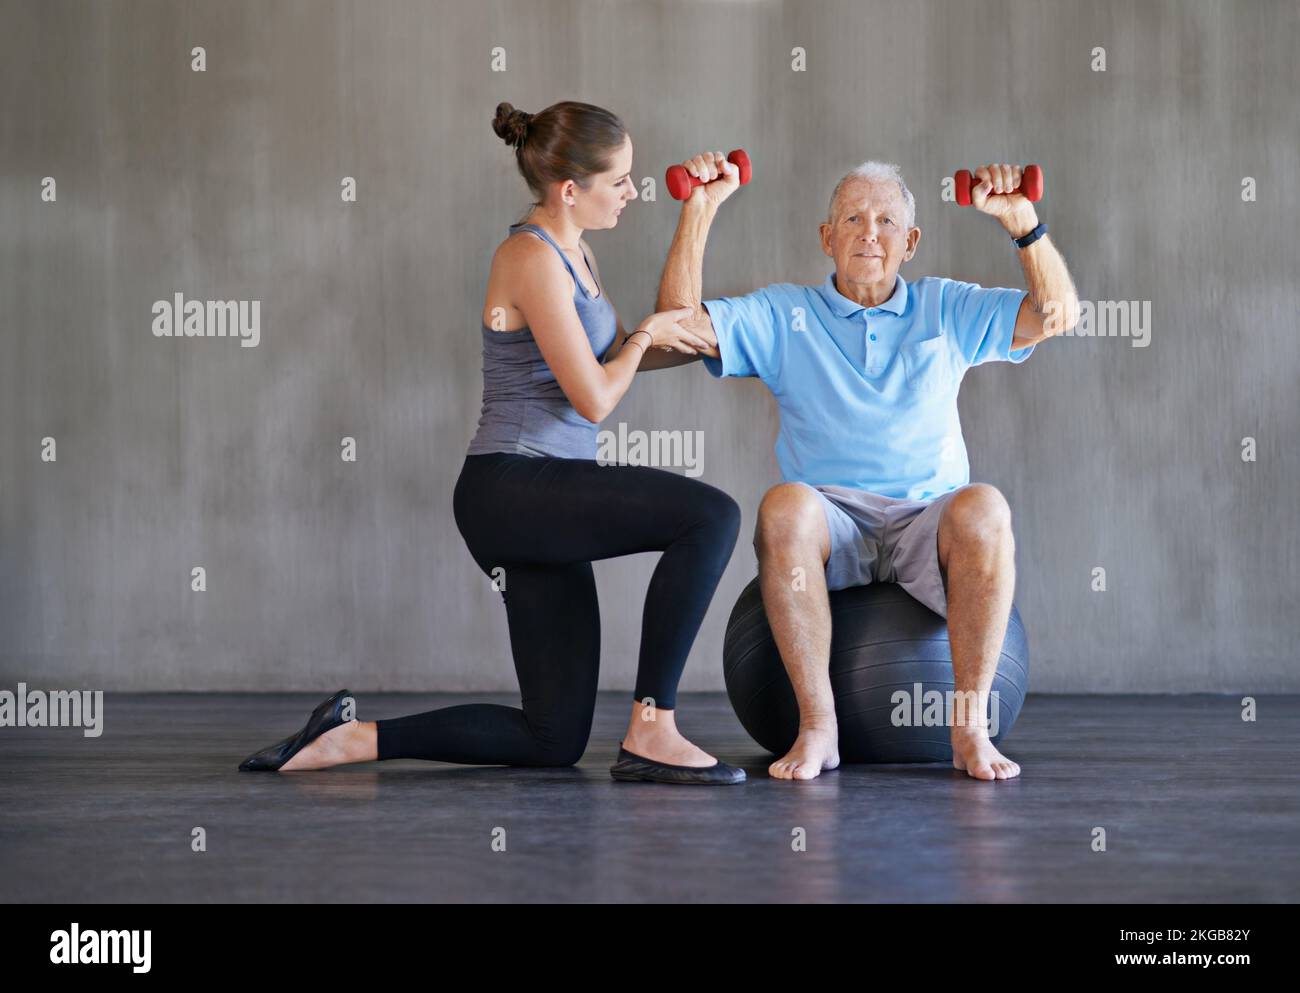 Nursing him to strength. a a physical therapist working with a senior man. Stock Photo